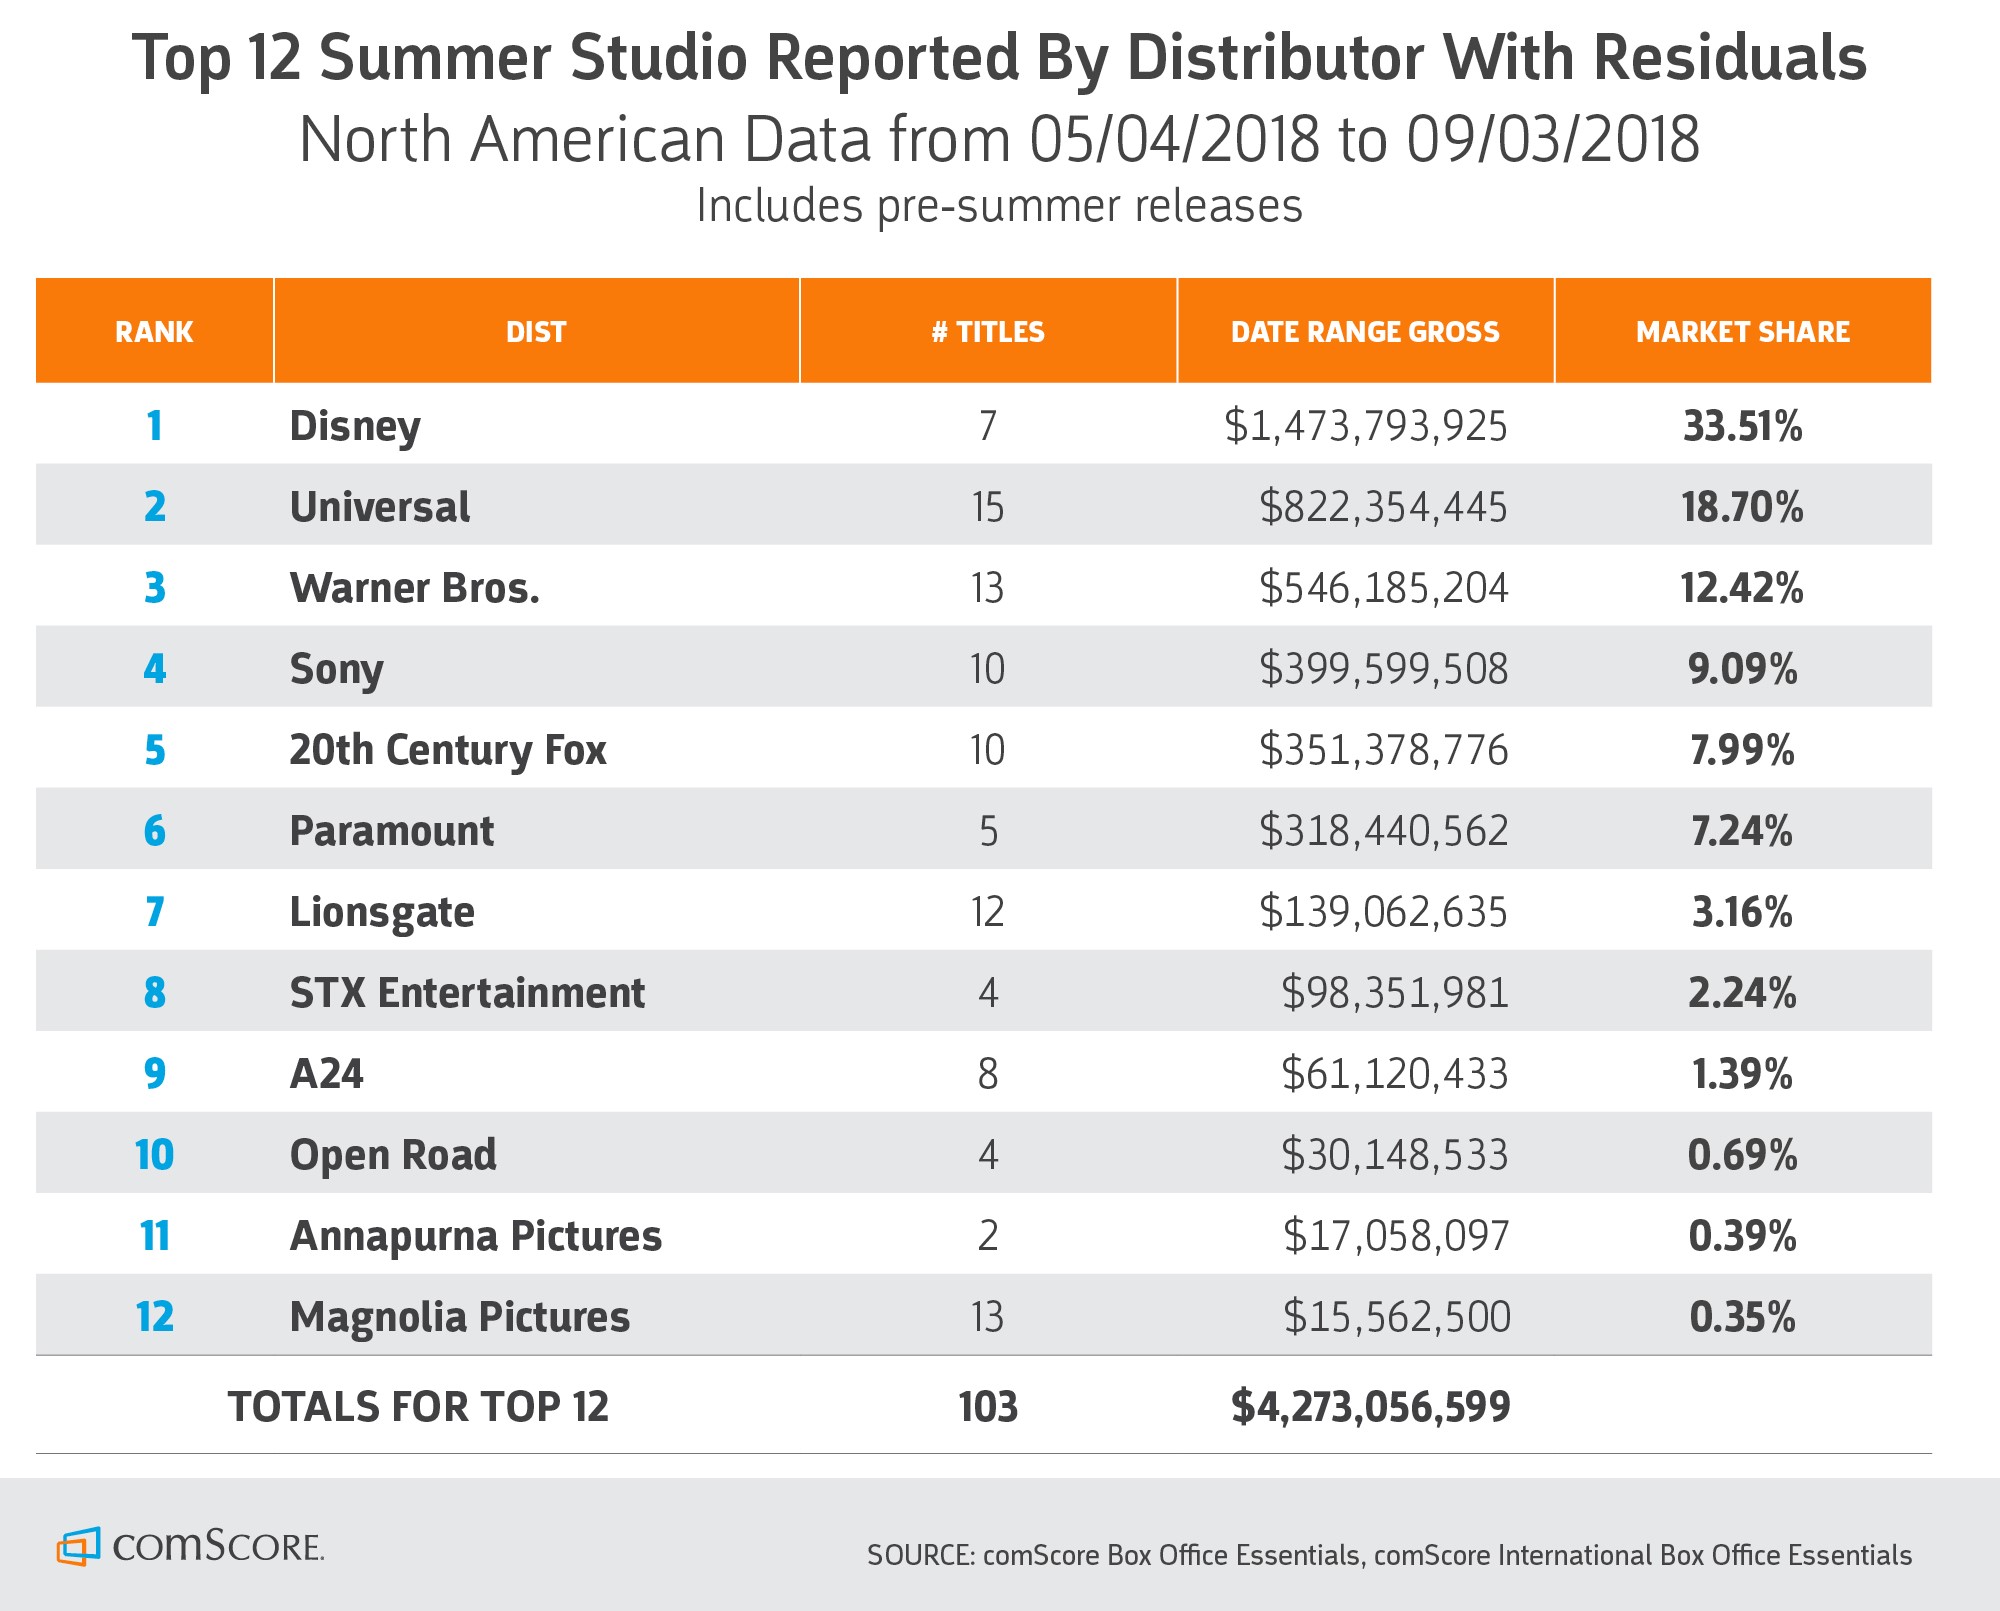 Top 12 Summer Studio Reported By Distributor With Residuals